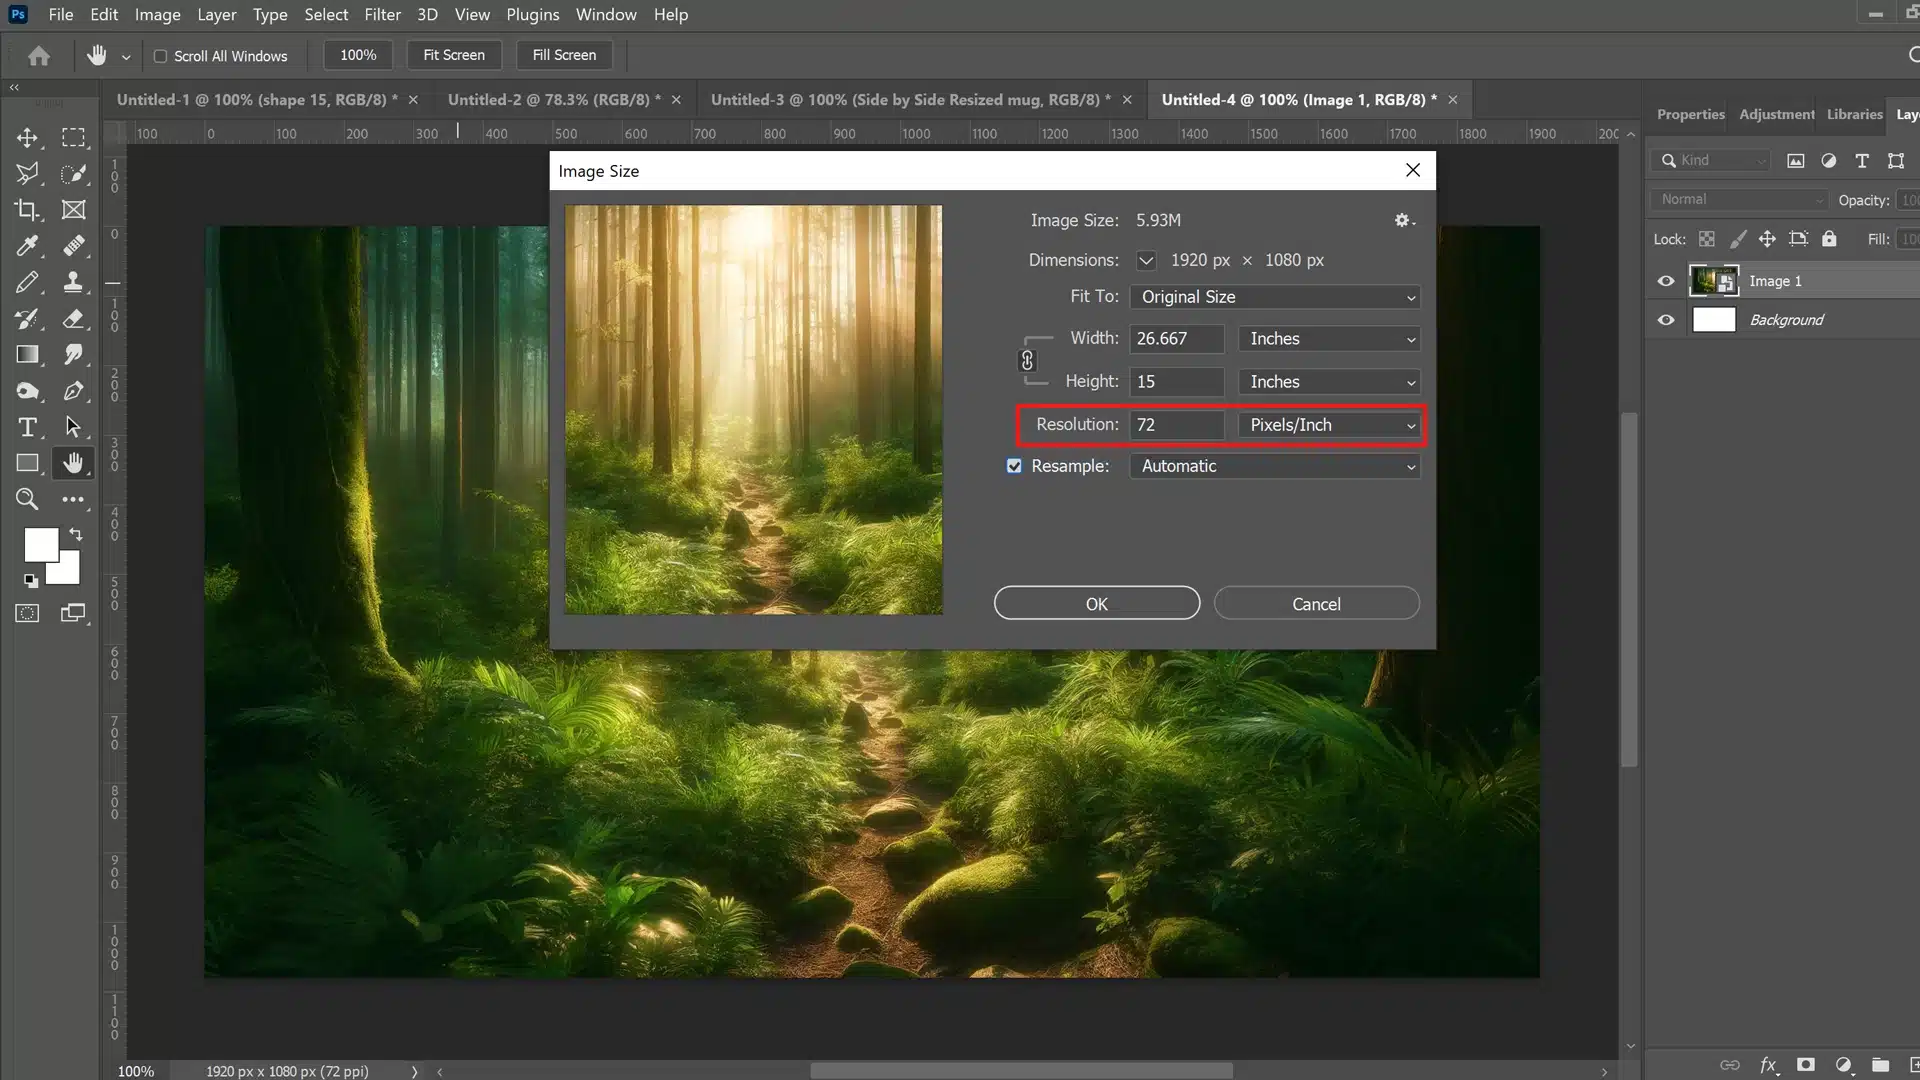 A screenshot of Photoshop showing the 'Image Size' dialog box with a background image of a forest path bathed in sunlight, demonstrating the process of adjusting image dimensions.